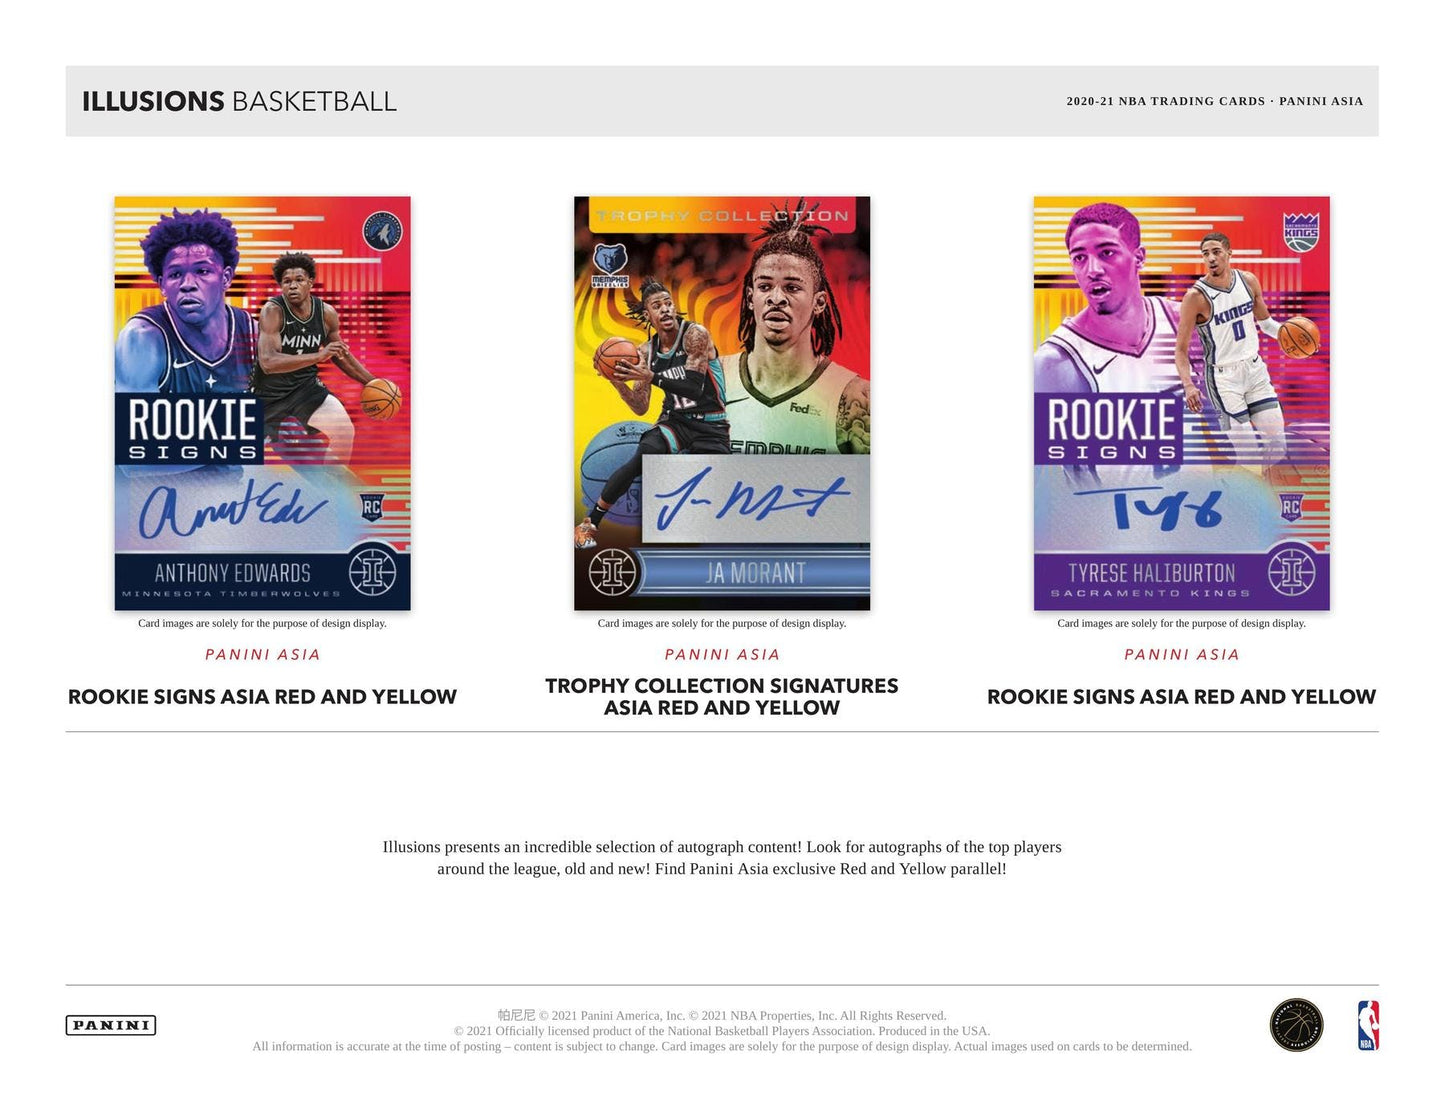 Offer For 2020-21 Panini Illusions Basketball Asia RufajBuy